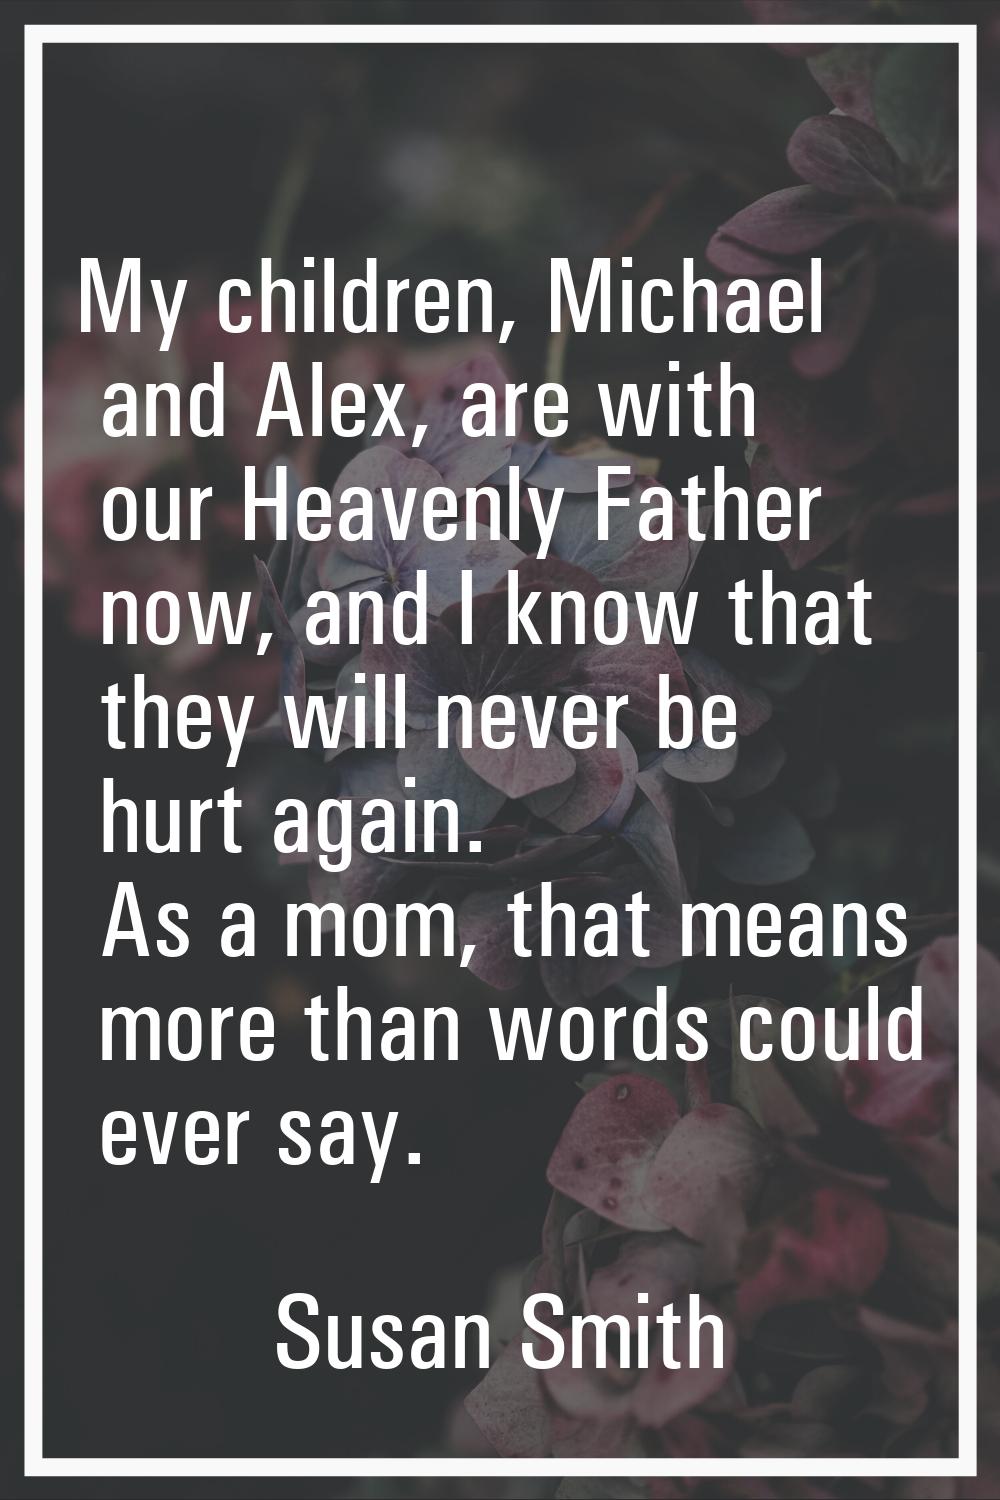 My children, Michael and Alex, are with our Heavenly Father now, and I know that they will never be